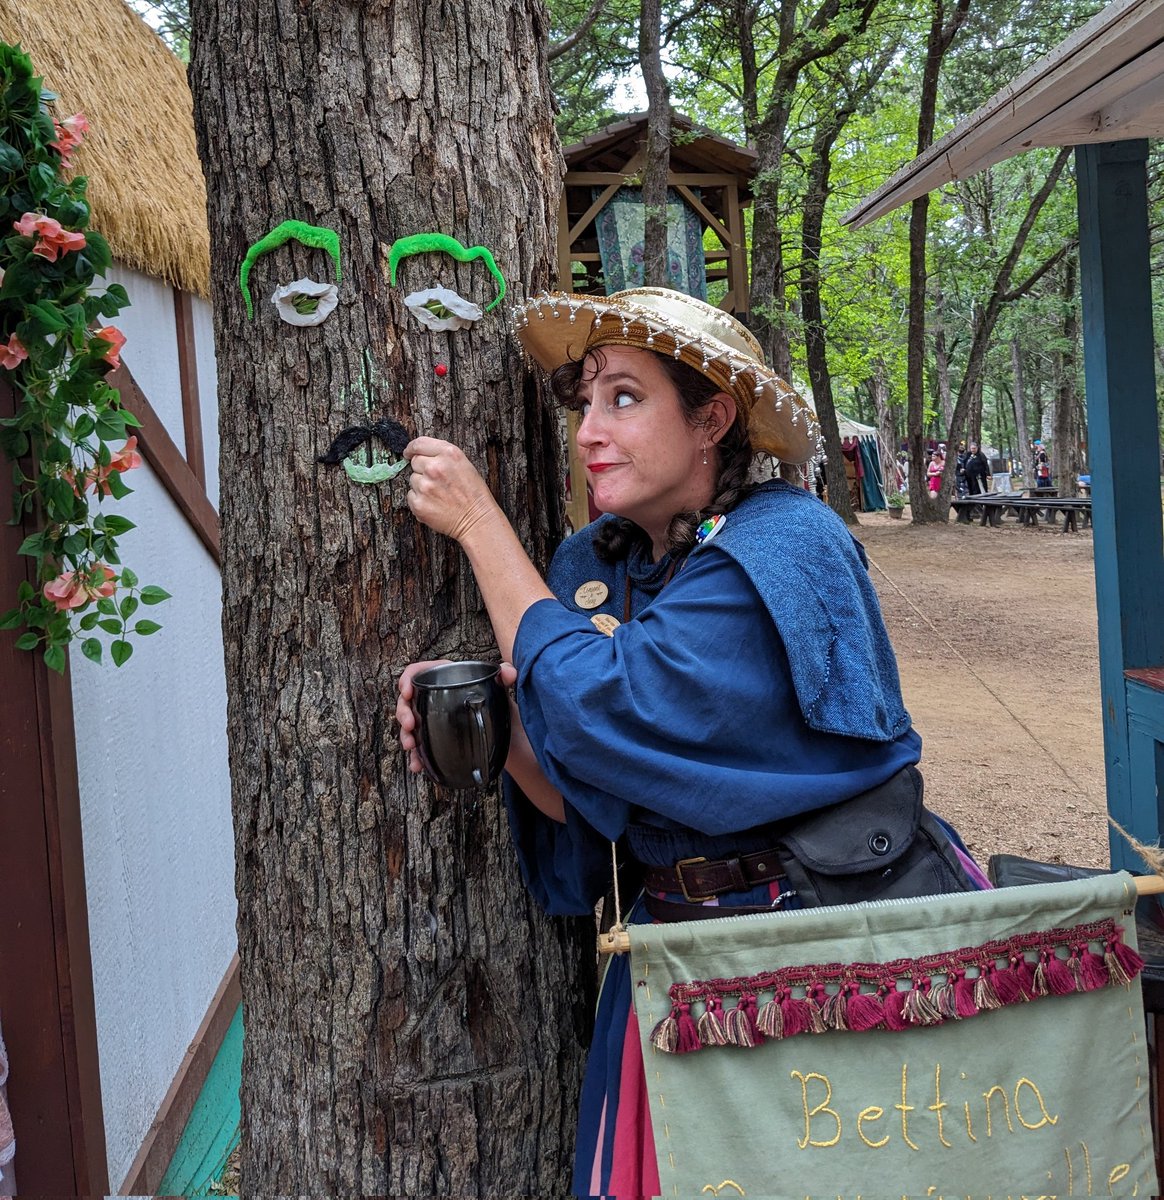 They said Bettina Bawdeville was barking up the wrong tree, but she absolutely mustache him a question. 

#renfaire #renfest @sherwoodfaire